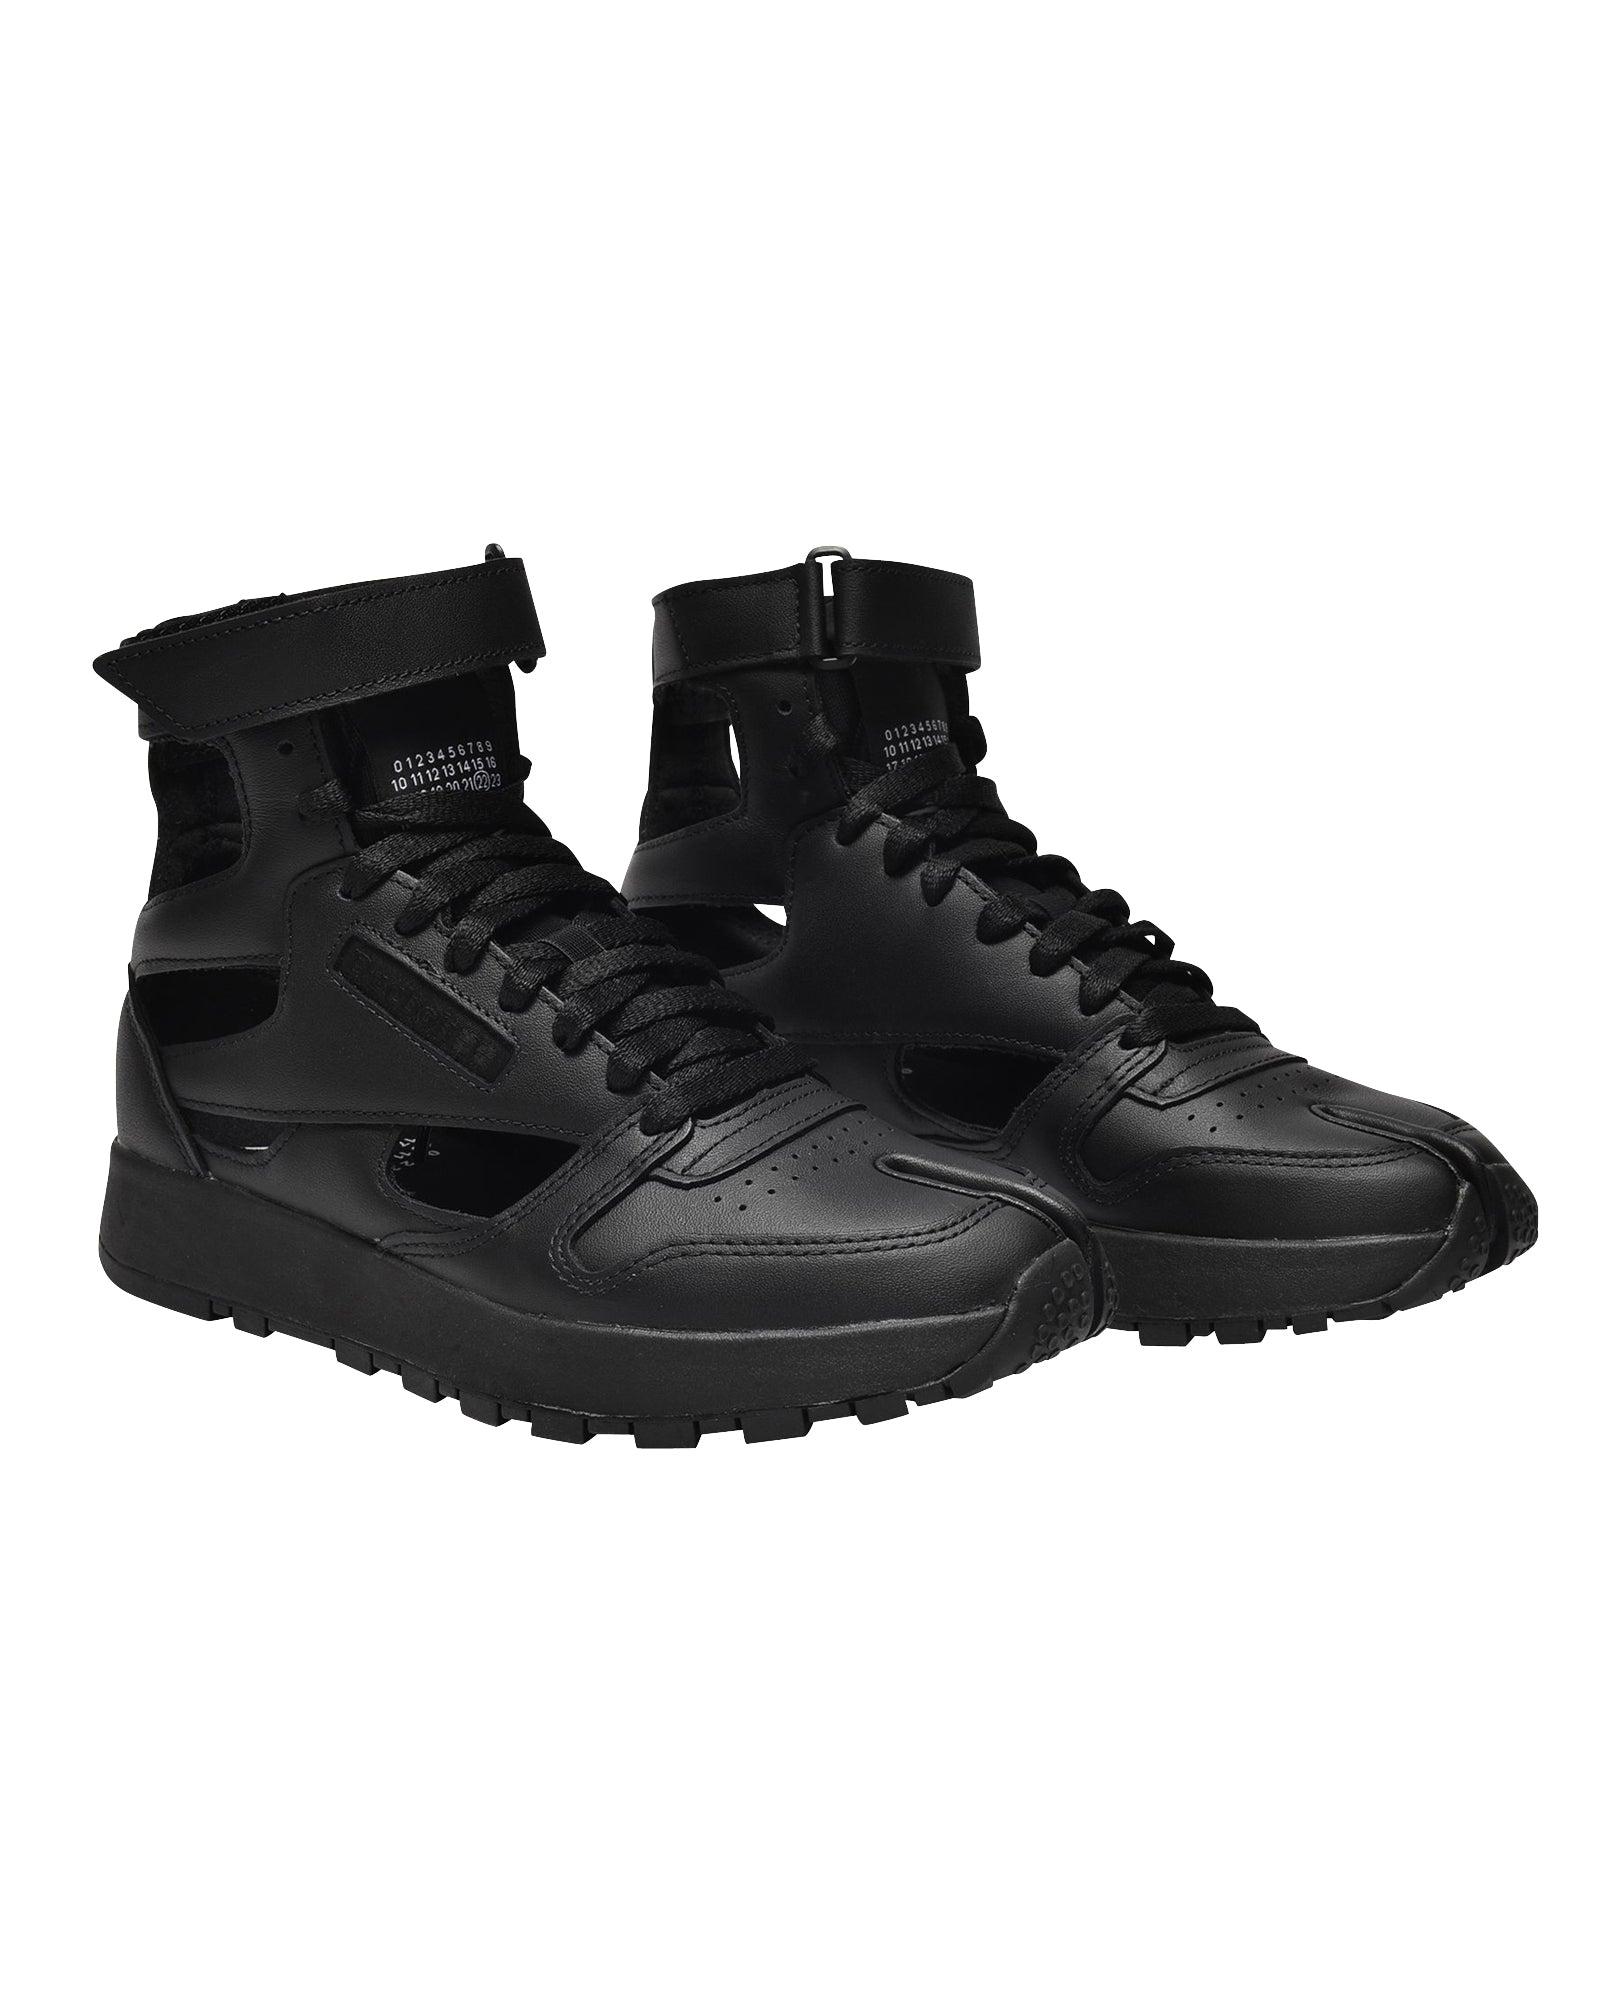 Maison Margiela Classic Gladiator Sneakers In Black Leather - Lyst